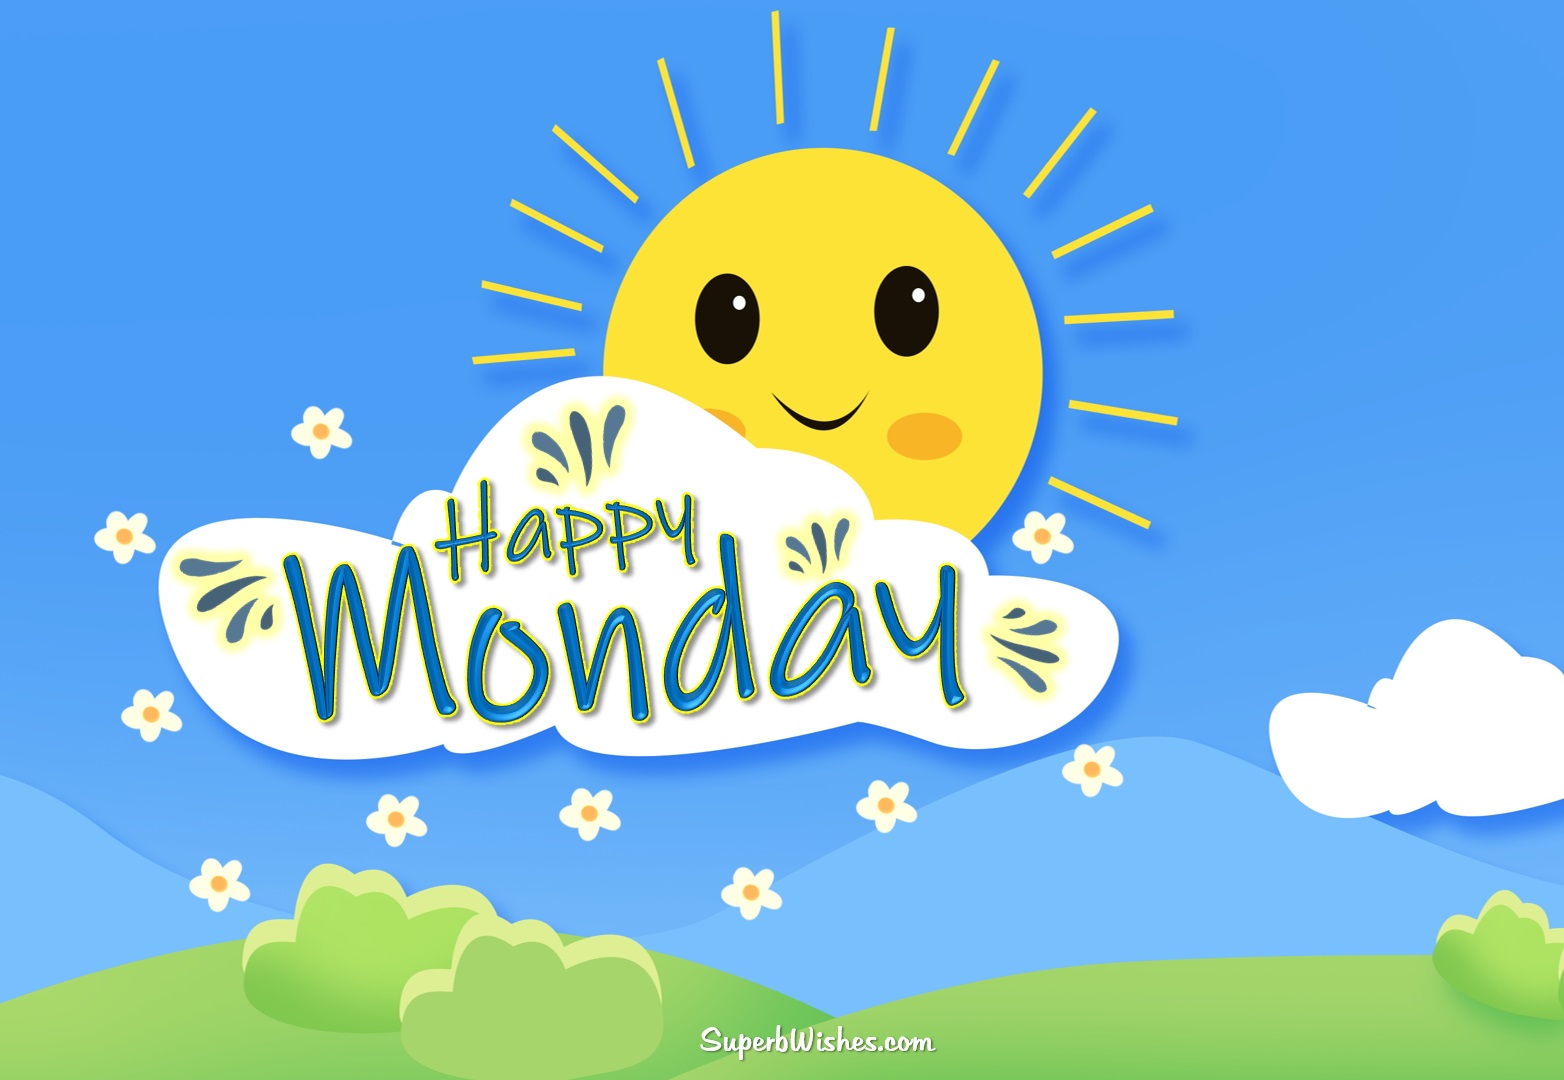 Happy Monday Images | Beautiful Monday Pictures | SuperbWishes